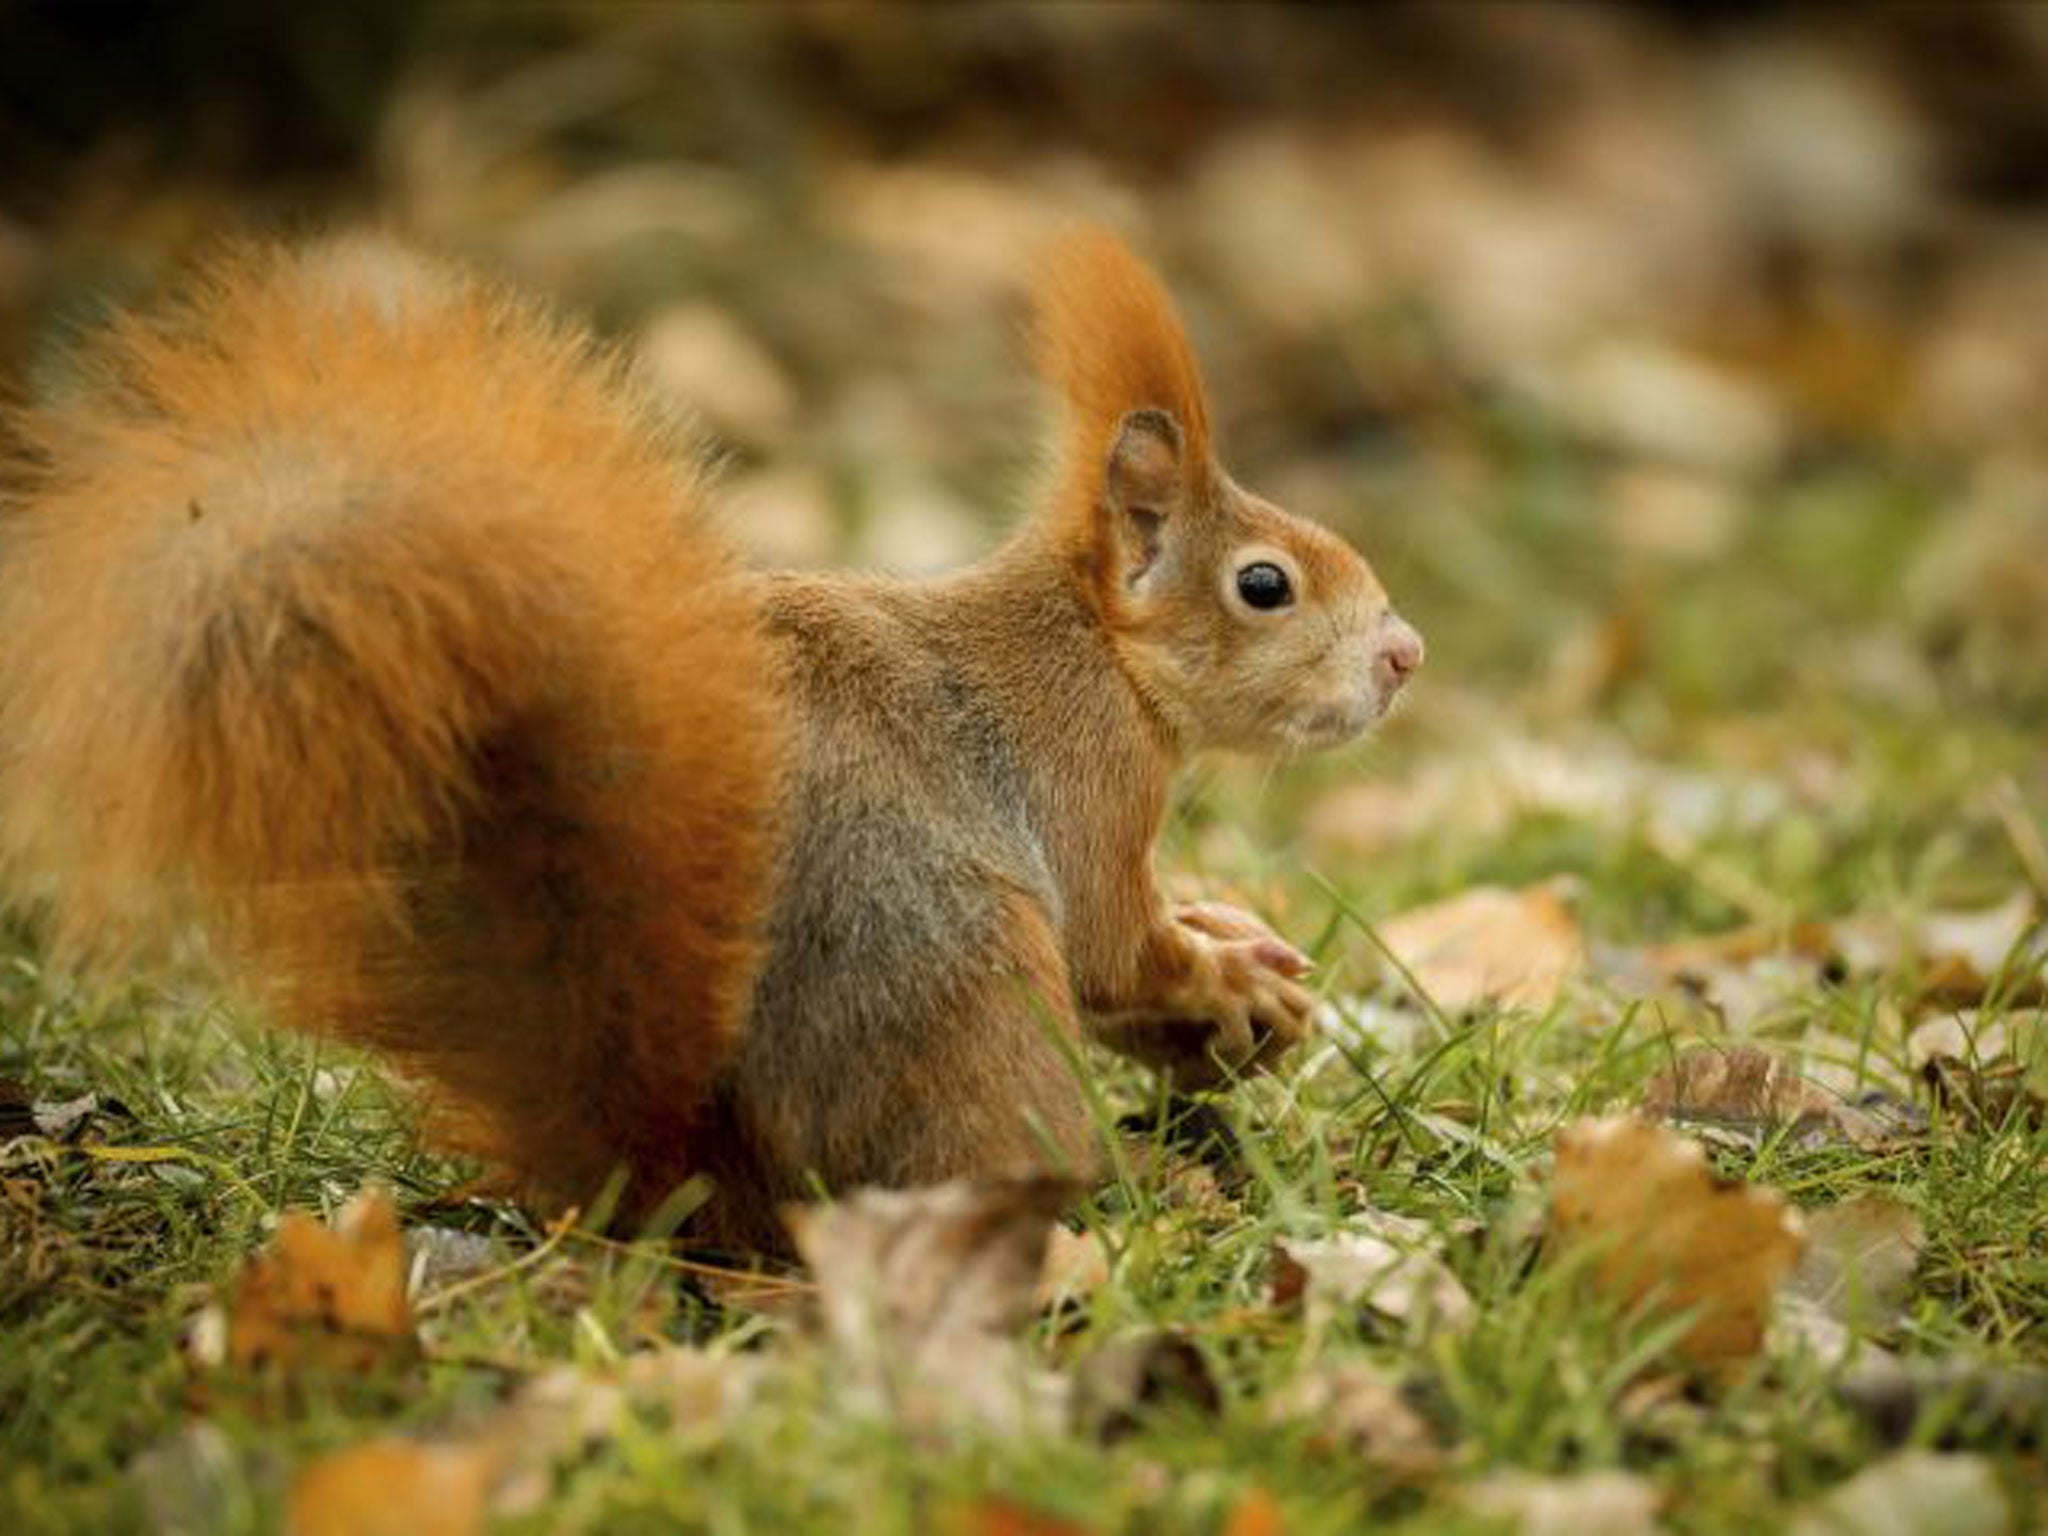 Nutcracker: A rare red squirrel out foraging